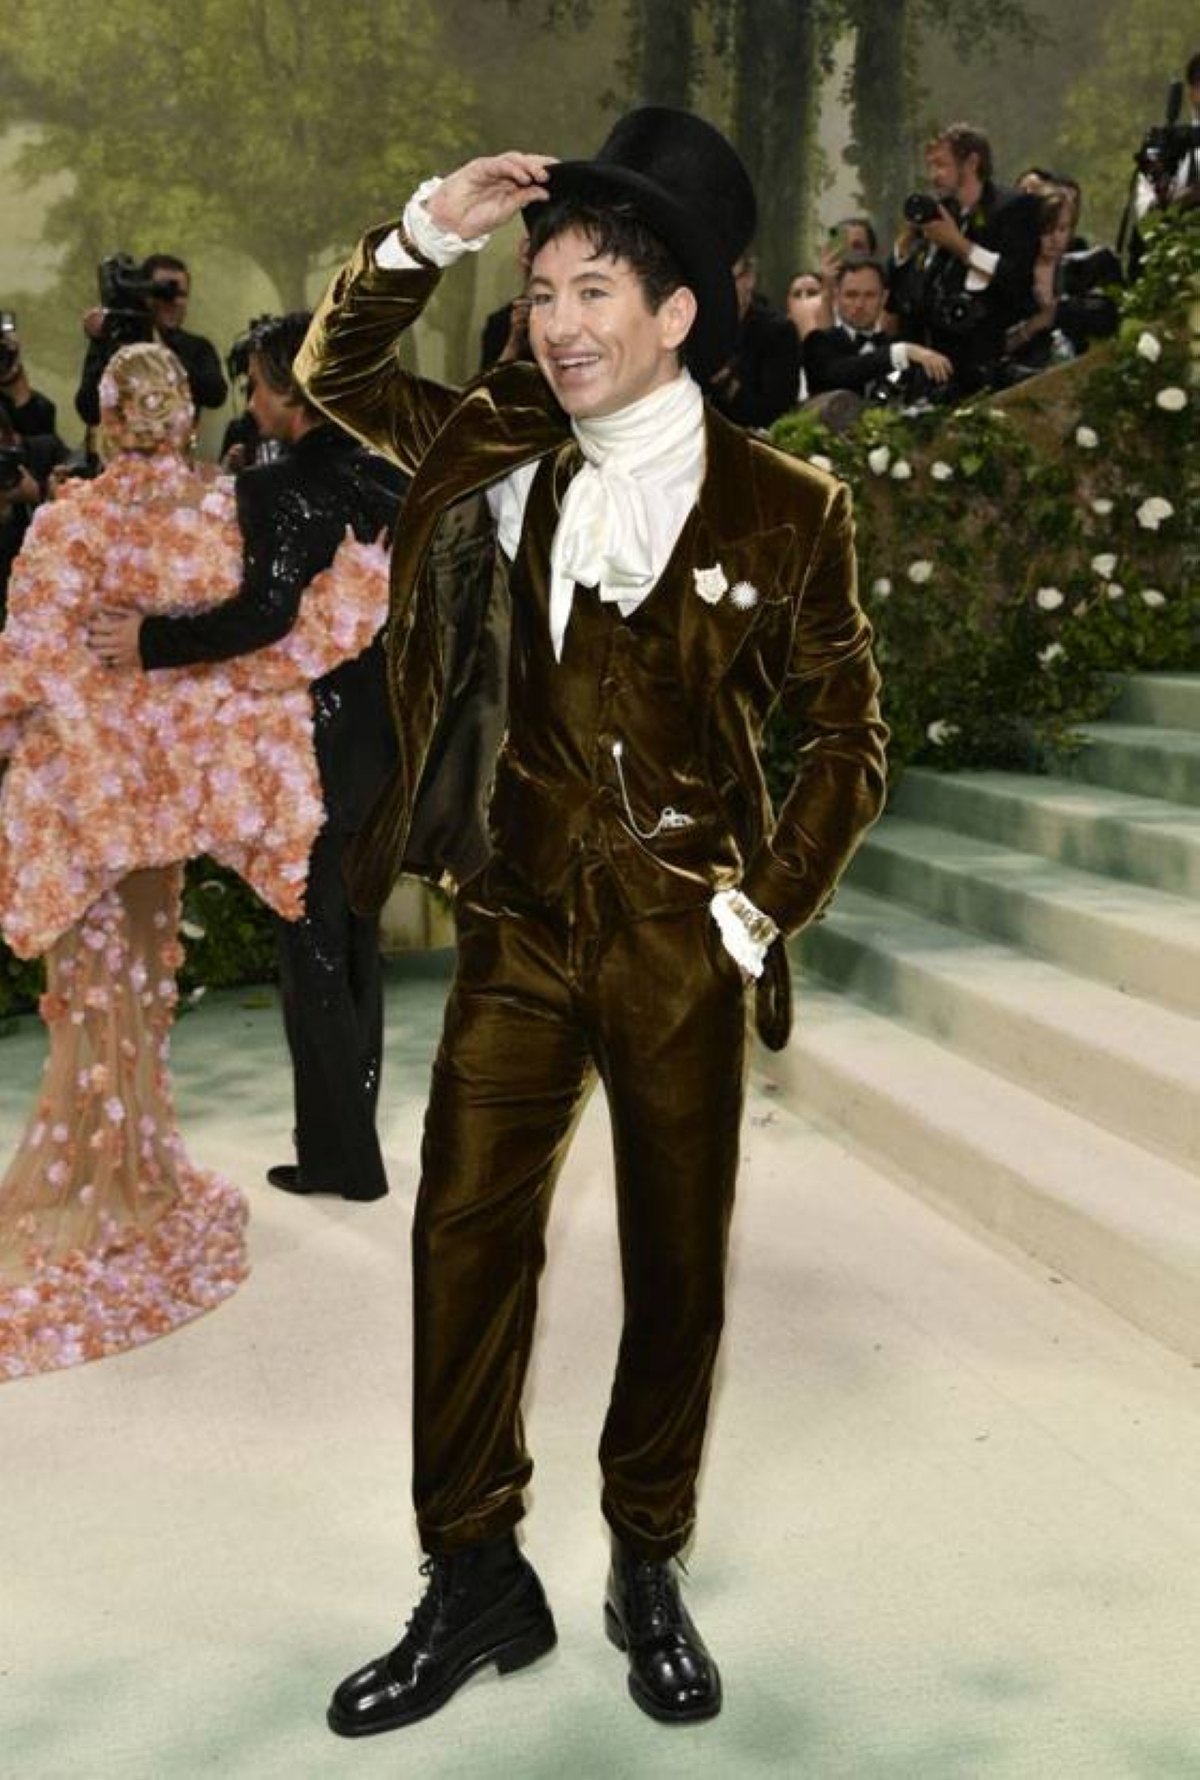 Amid all the princesses was the Mad Hatter, Barry Keoghan.